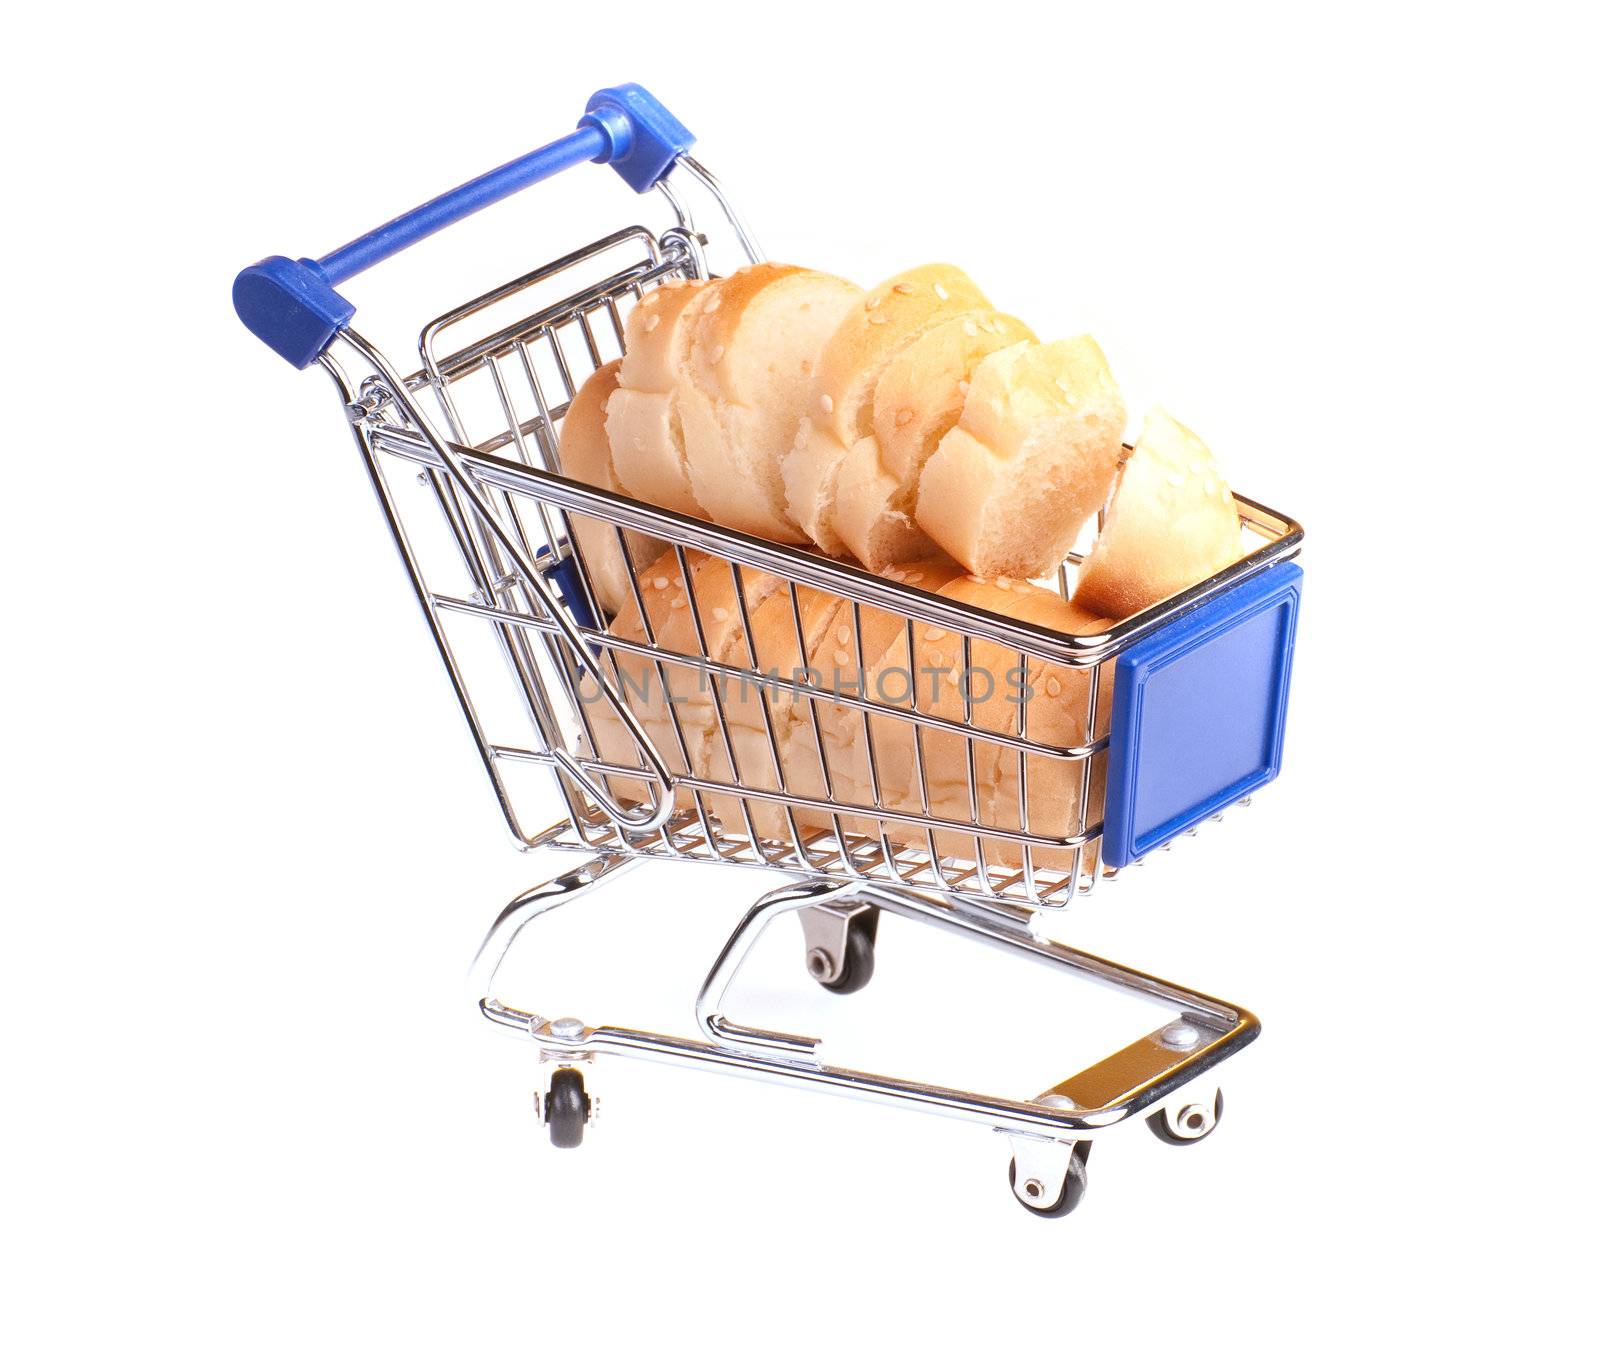 metal shopping trolley filled with bread